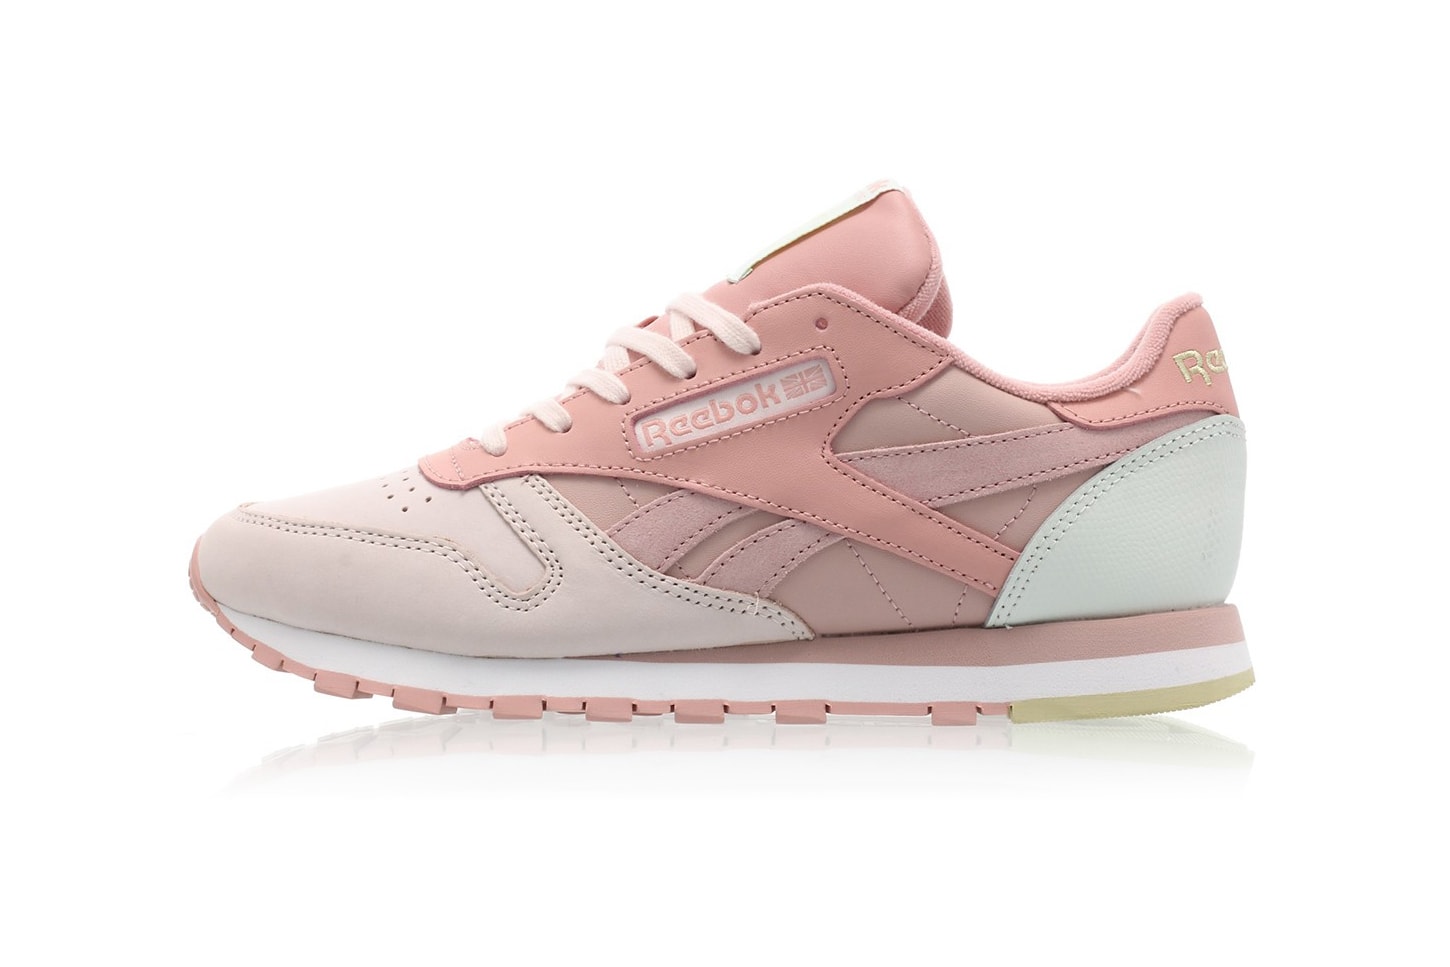 Reebok Classic Leather Pale Shell Pink